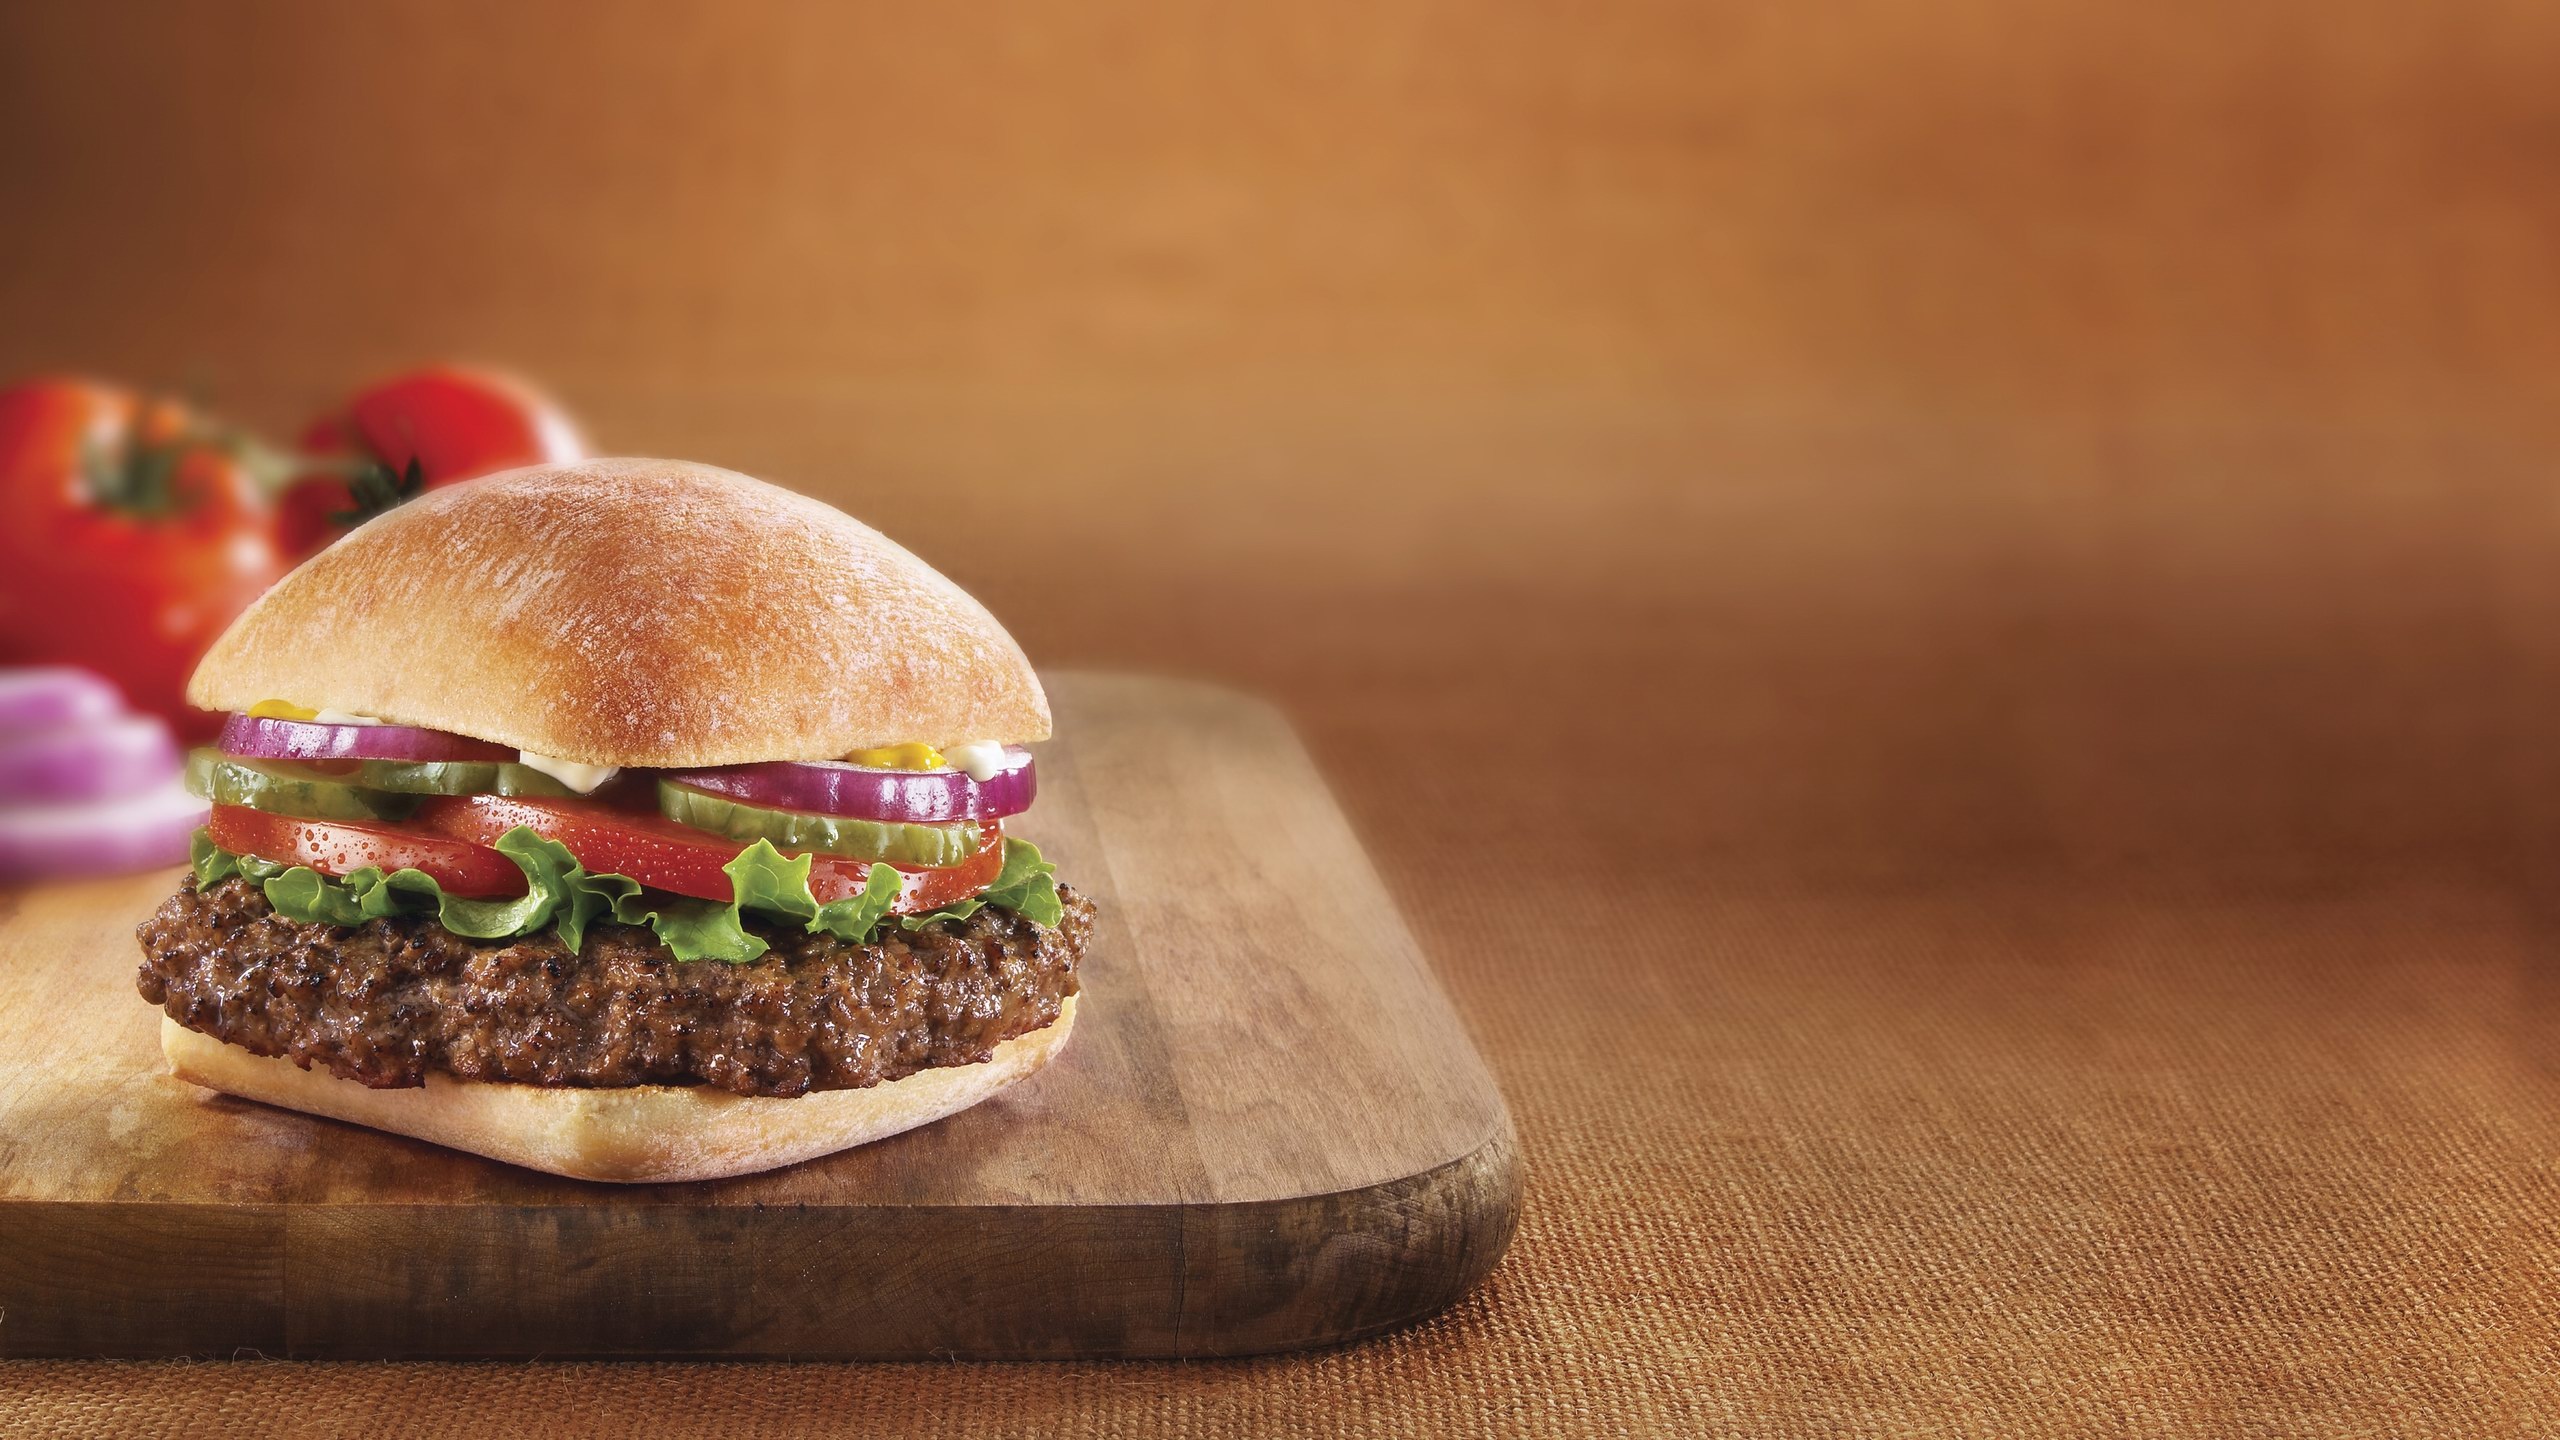 Hamburger: Topped with a slice of cheese, Buns are toasted or grilled. 2560x1440 HD Wallpaper.